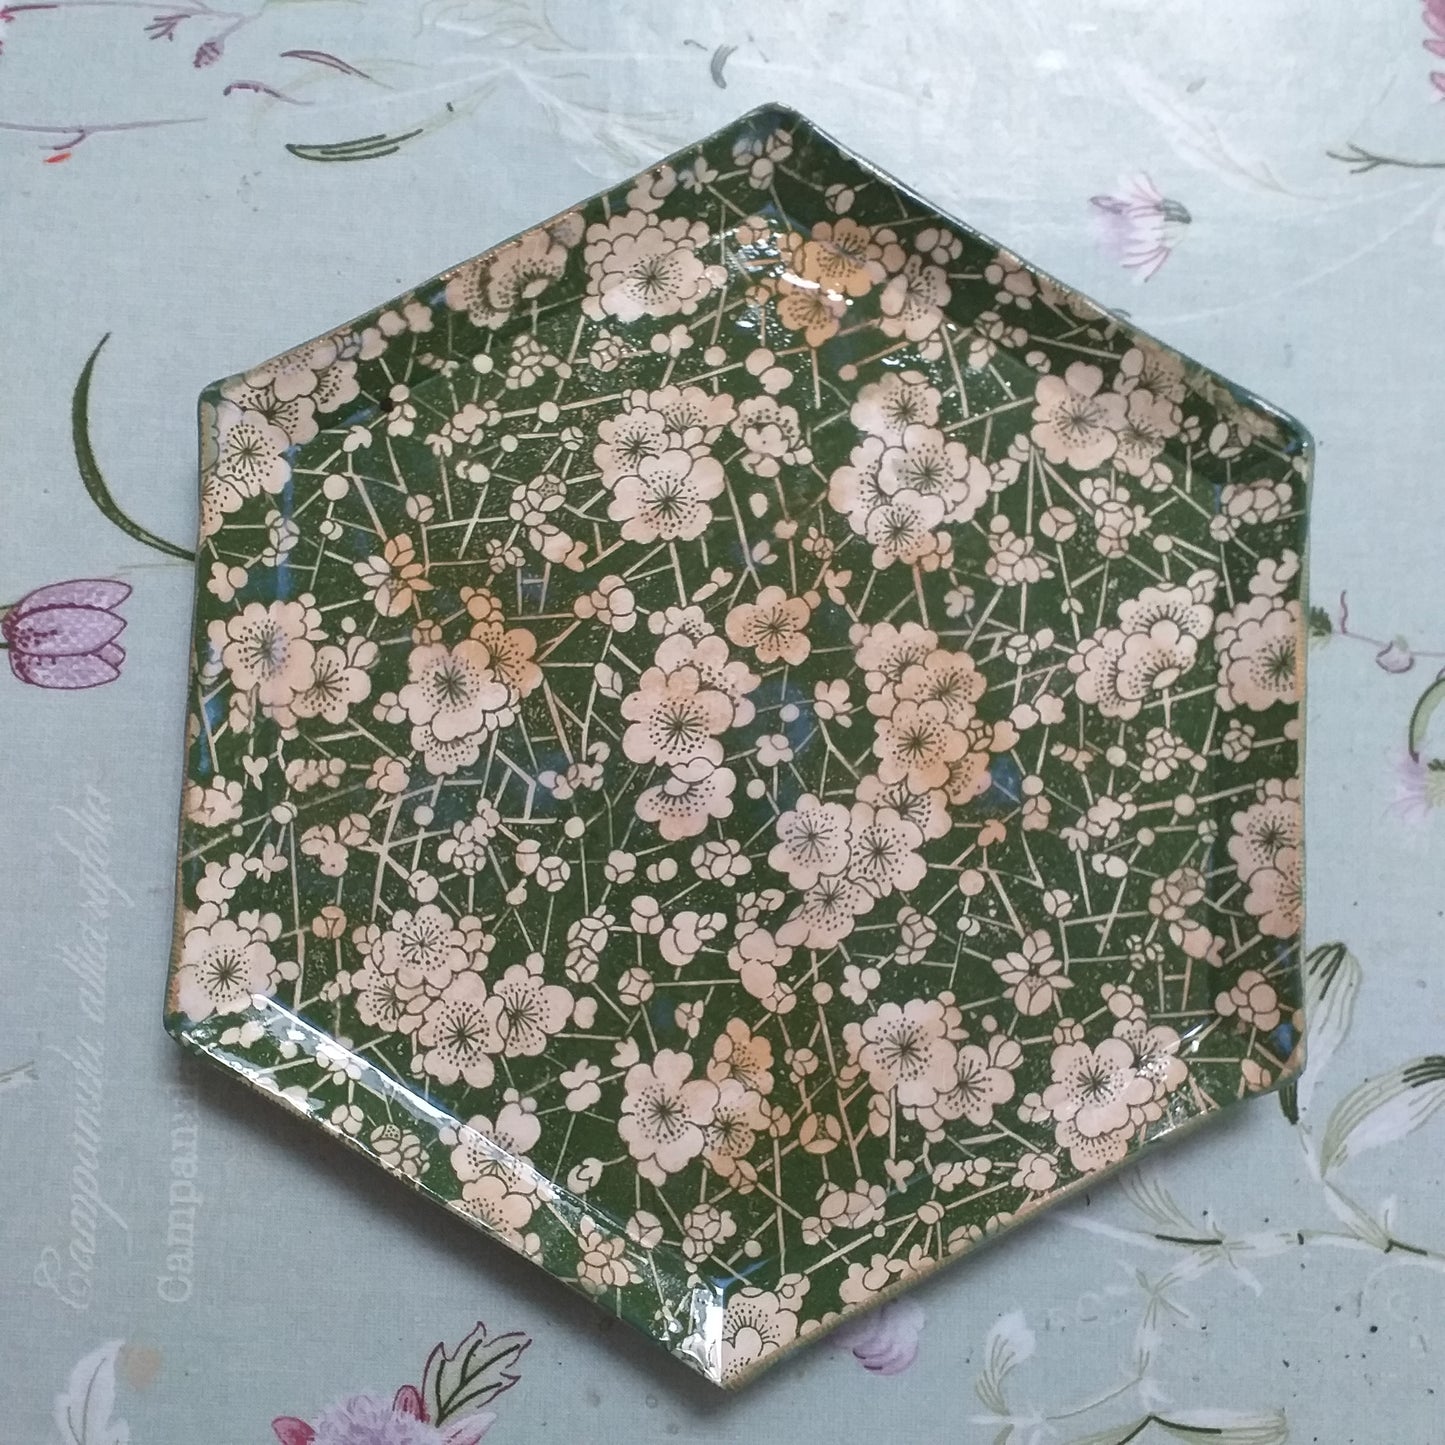 Plate ceramic 25cm, six sided snack or dinner plate.